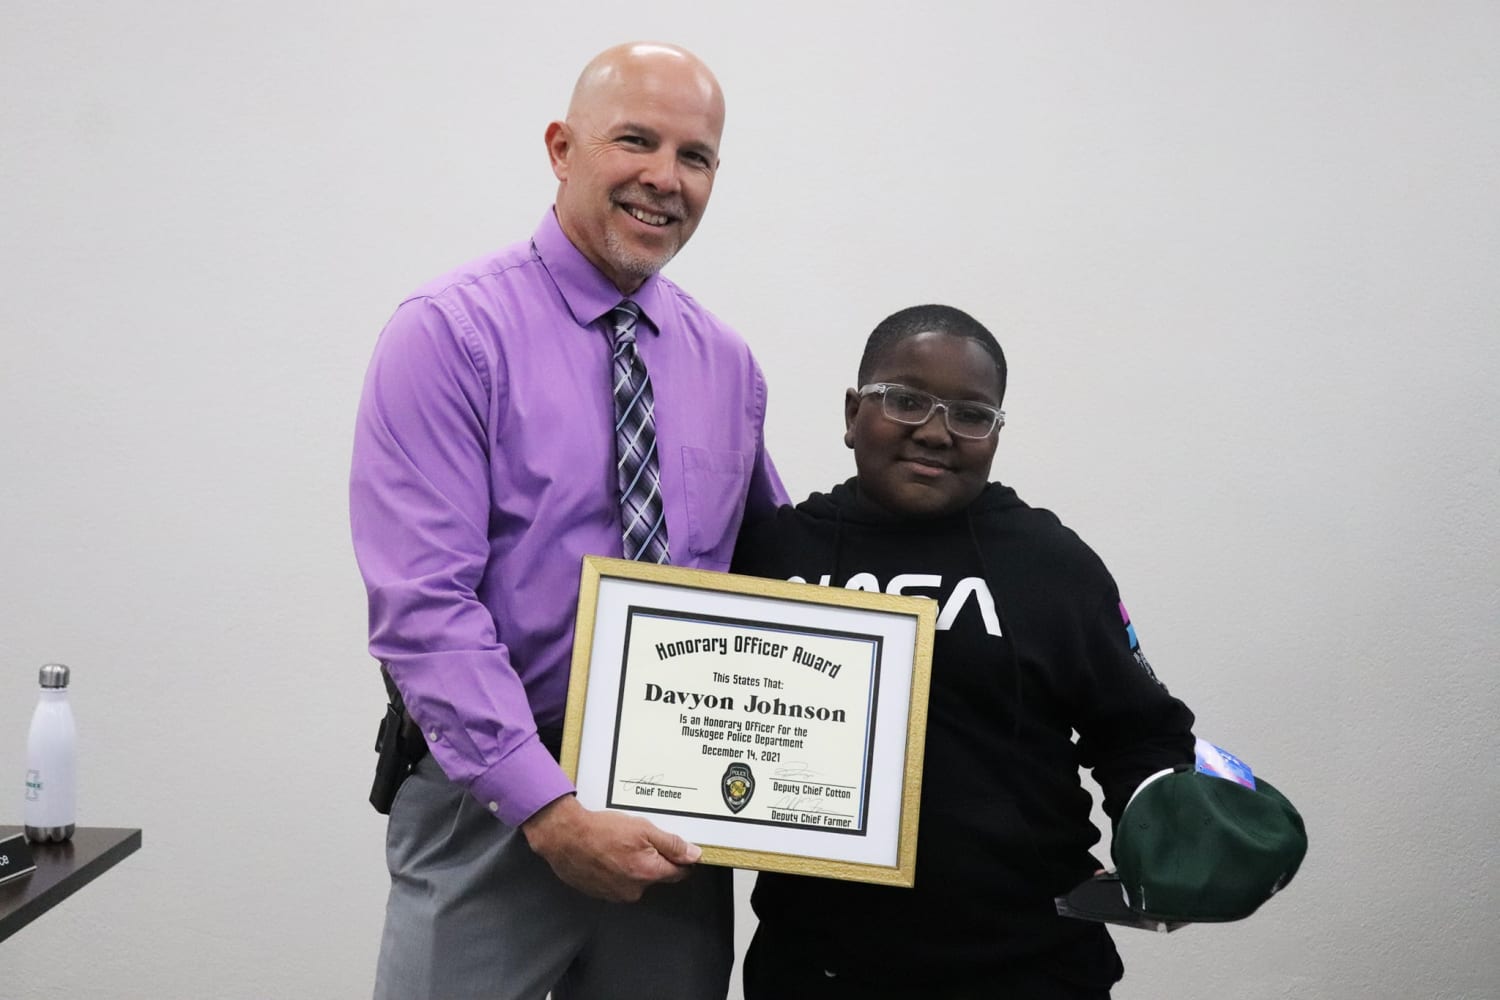 11-year-old Oklahoma boy awarded for saving lives in separate incidents on Dec. 9